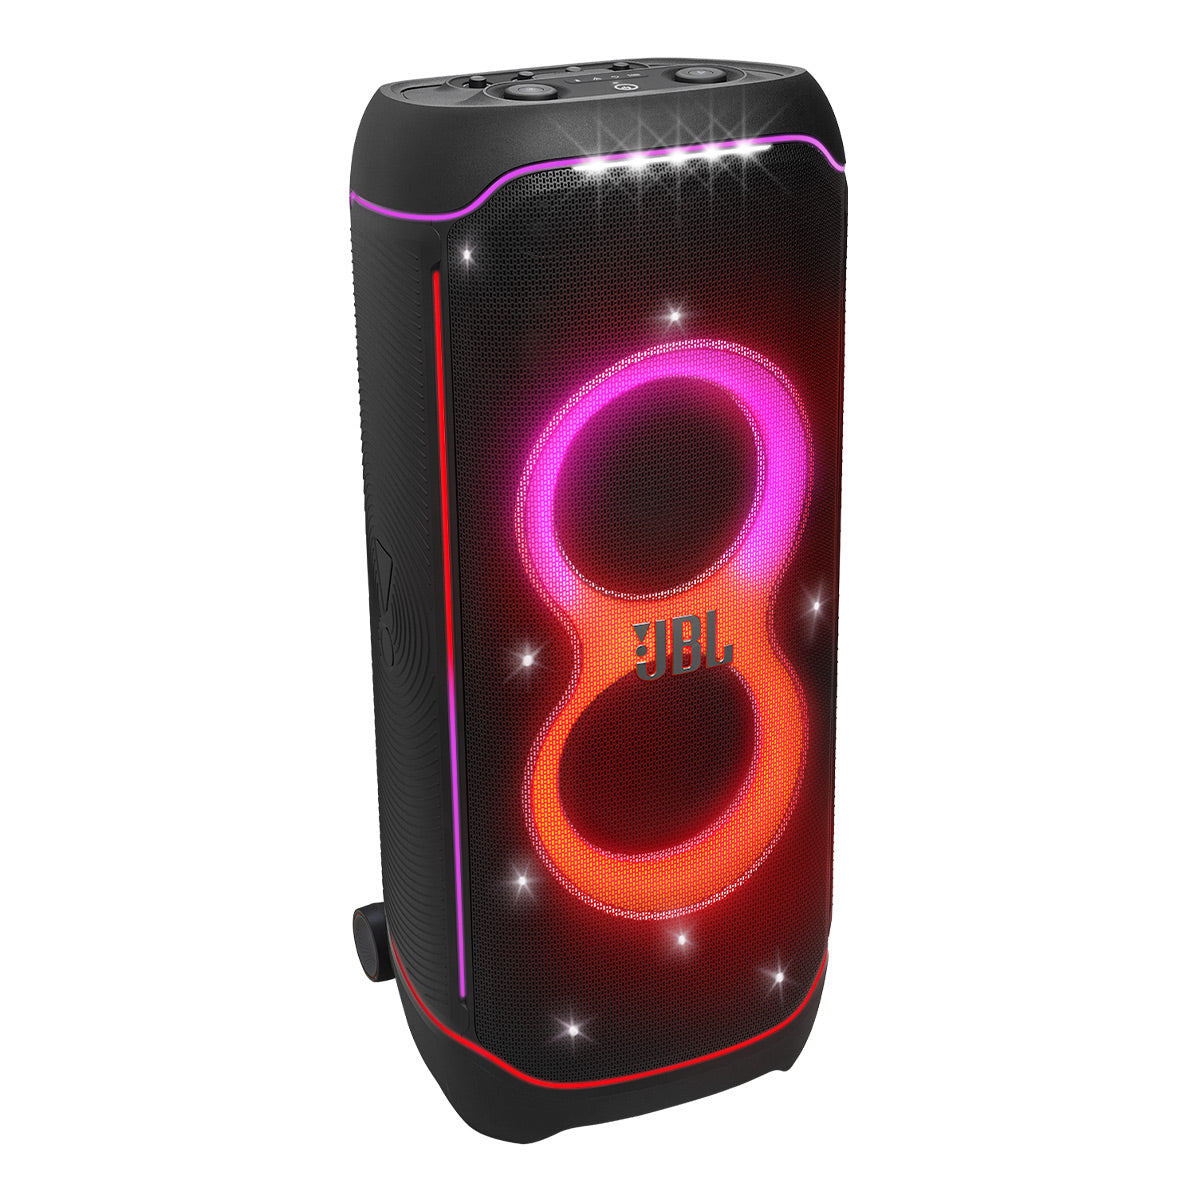 Ultimate World Inputs, Wi-Fi Stereo Effects, & Party Atmos, and Instrument Bluetooth Party with Lighting Dolby Speaker Box Rating Wide JBL IPX4 |